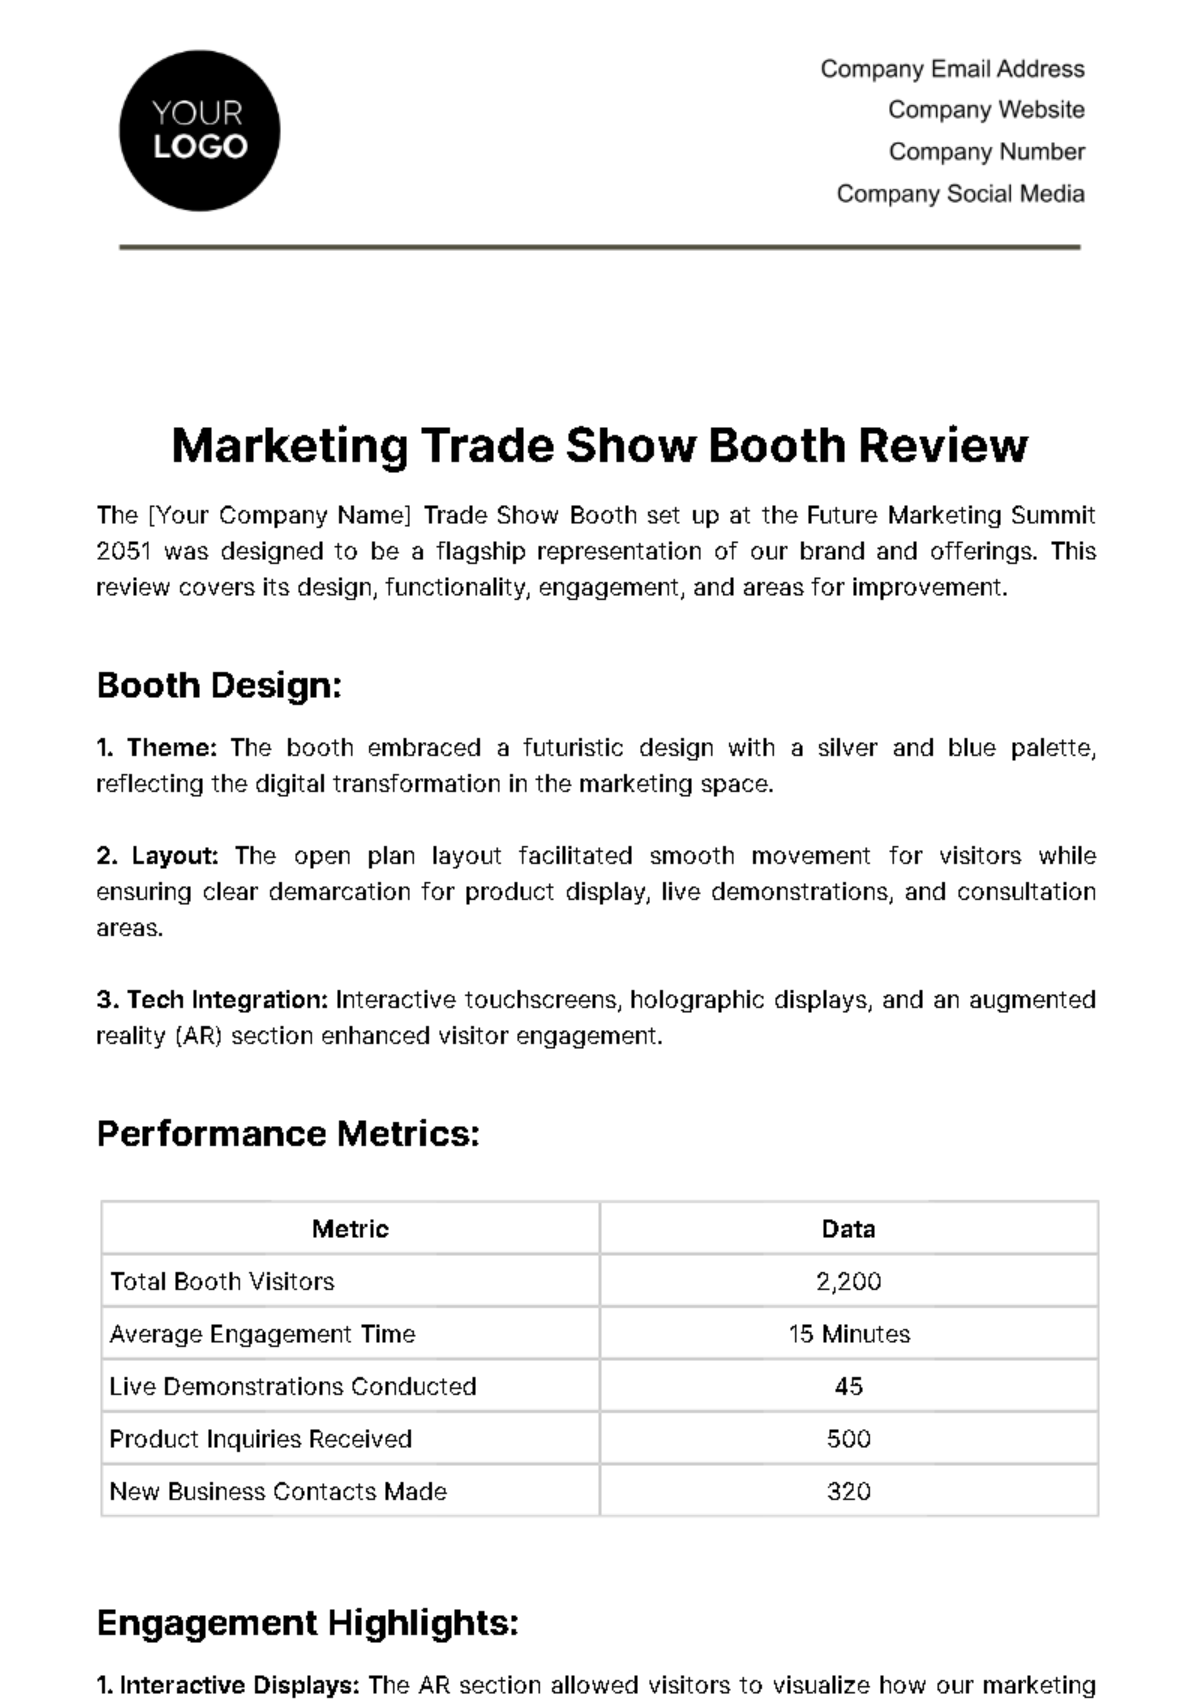 Marketing Trade Show Booth Review Template